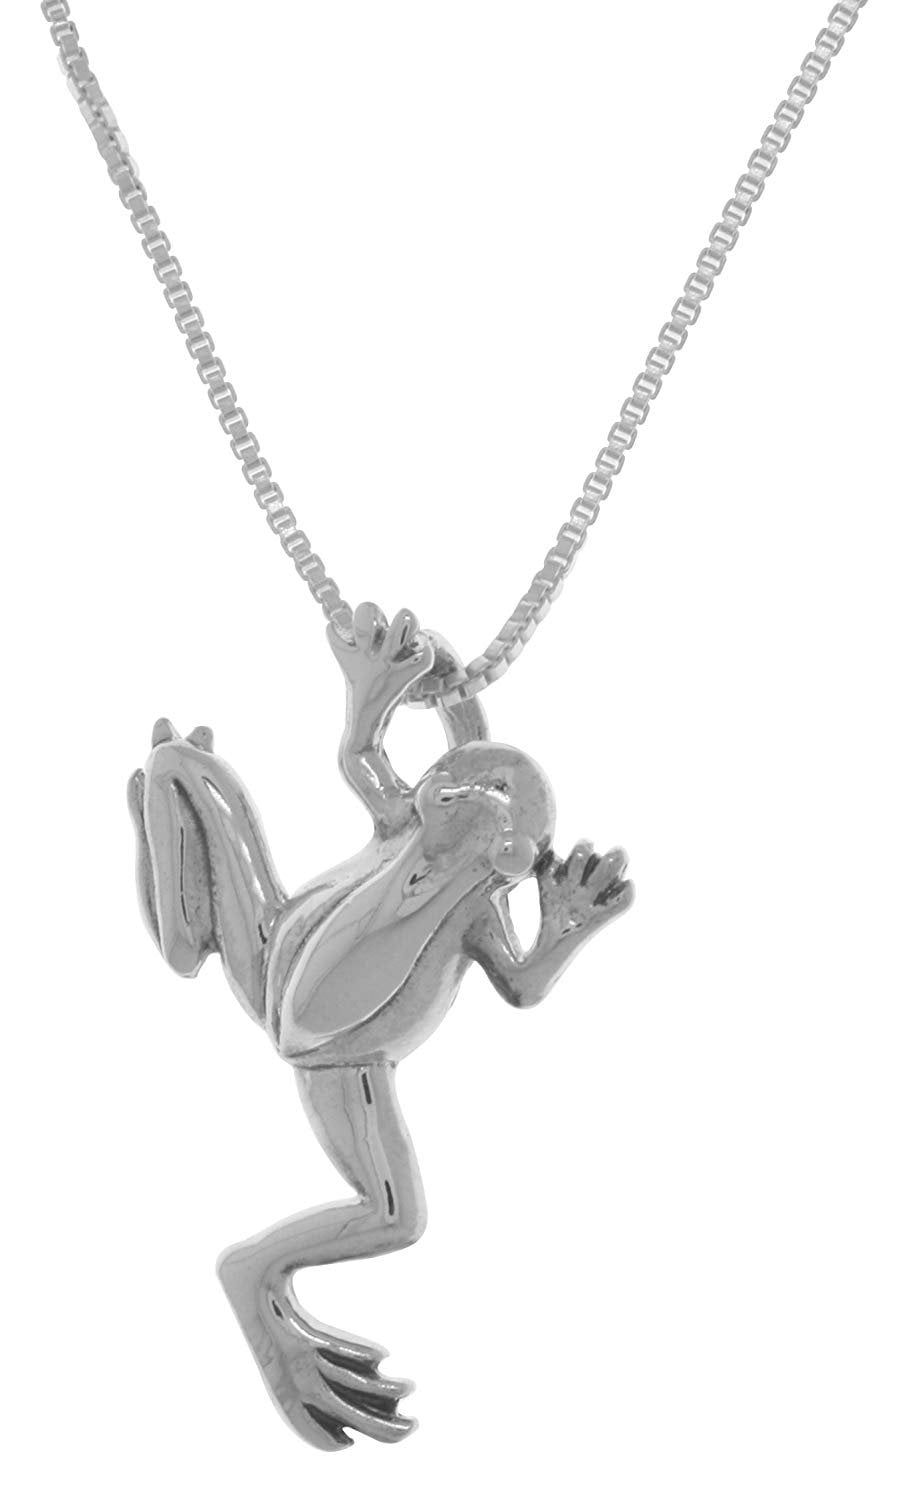 8 Metal Climbing Frog Charms Antique Silver Tone